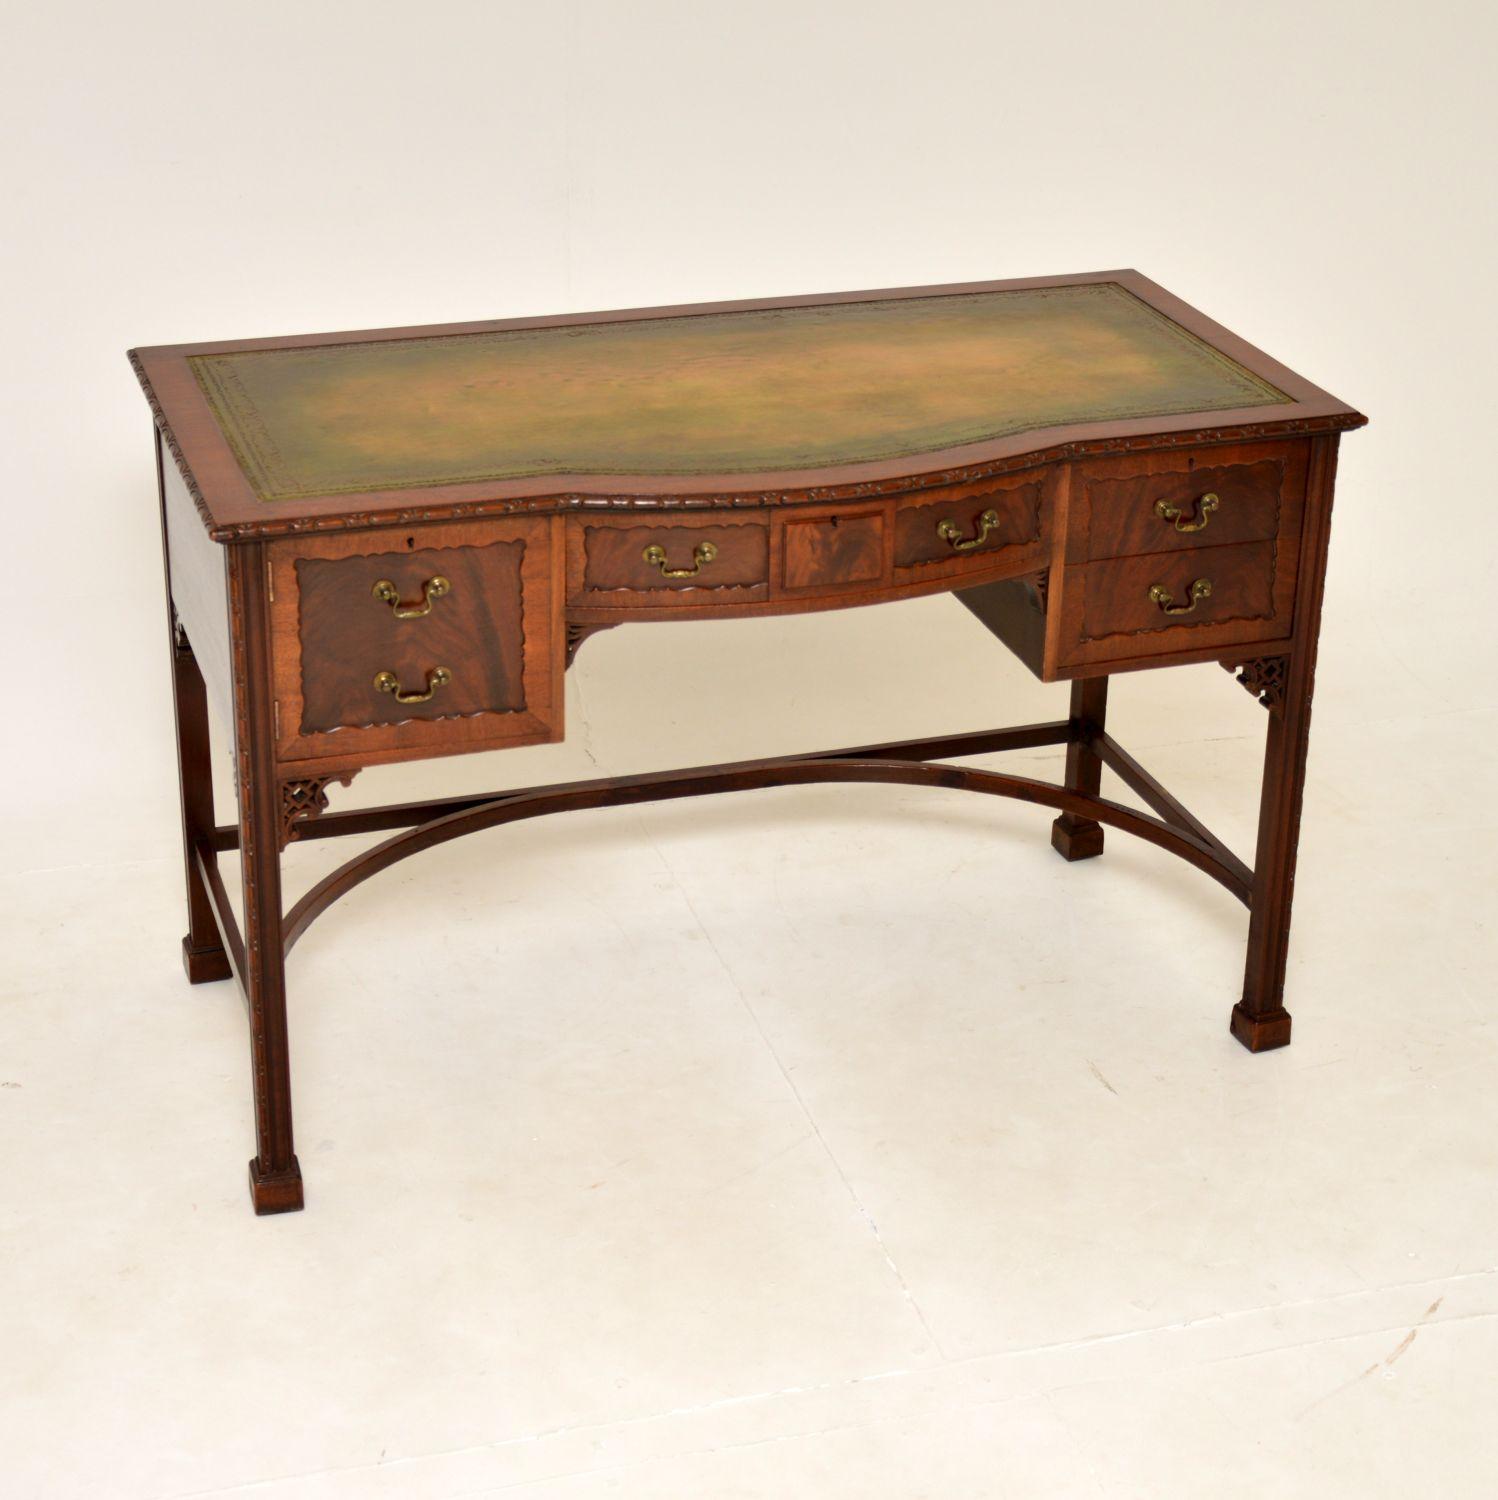 A superb antique leather top desk in the Chippendale style. This was made in England, it dates from around the 1890-1900 period.

It is of incredibly fine quality, with lots of lovely features. The fronts are recessed with lovely bordered patterns,